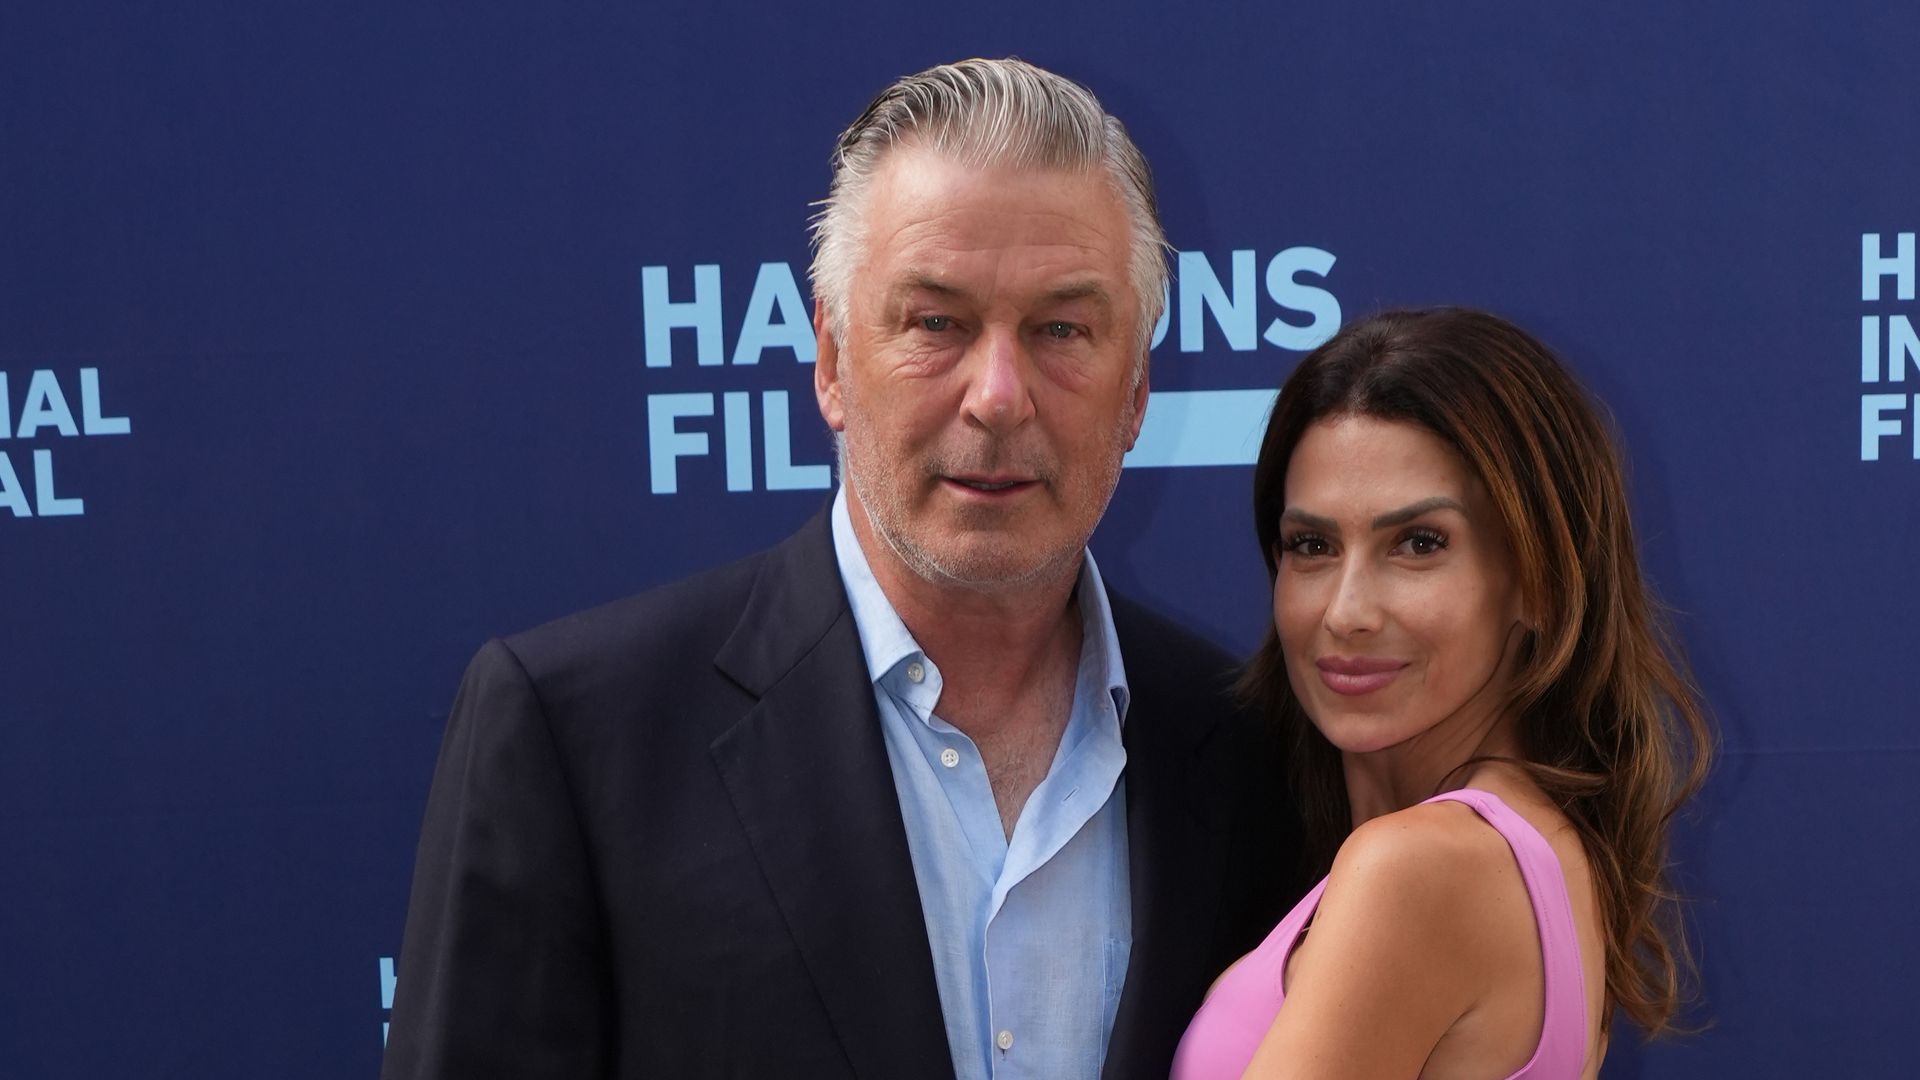 Alec and Hilaria Baldwin return to red carpet for the first time since shocking case dismissal